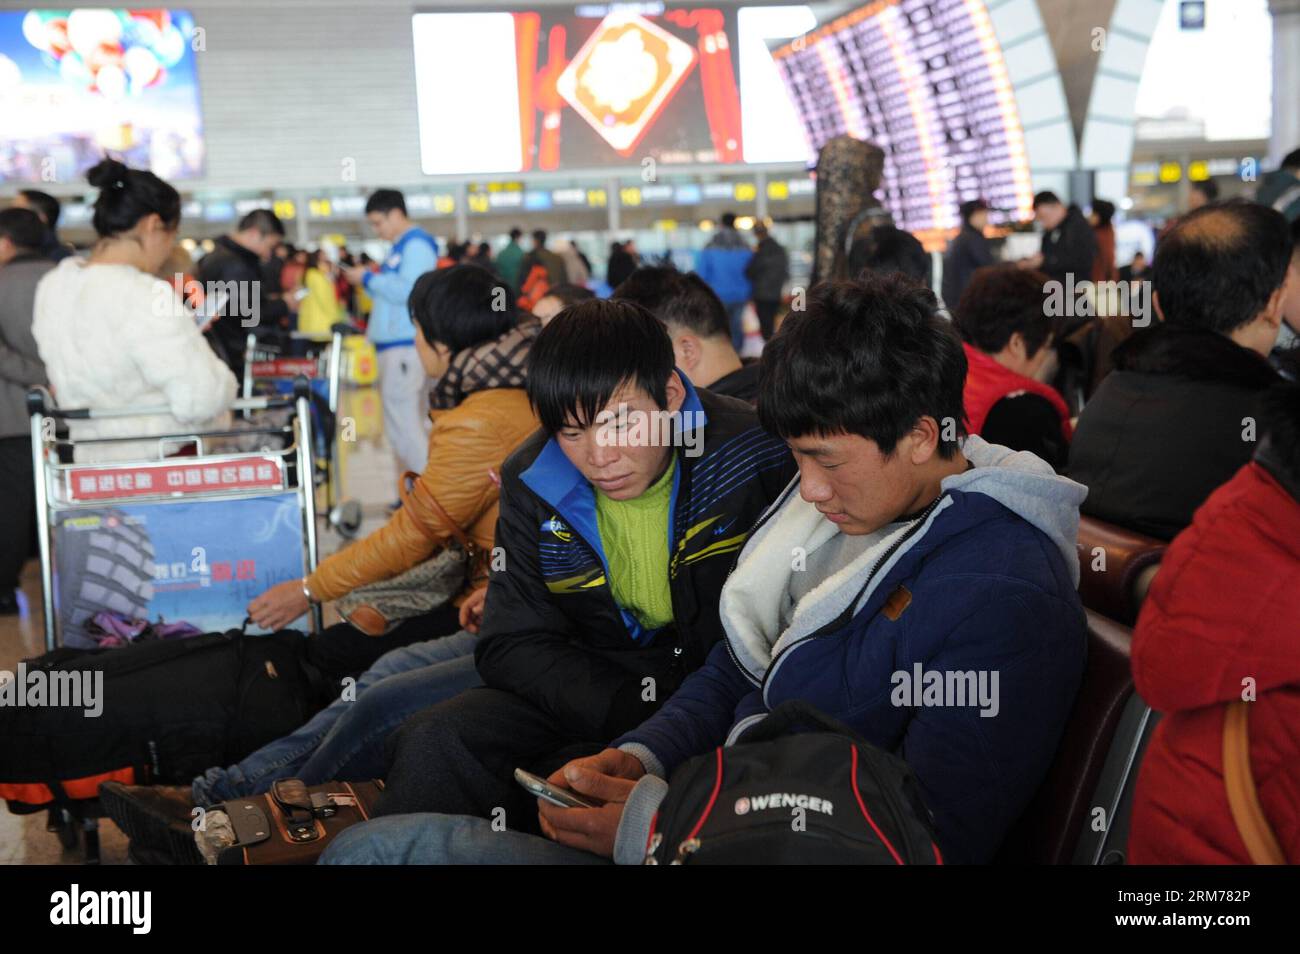 (140218) -- GUIYANG, Feb. 18, 2014 (Xinhua) -- Passengers are stranded at Longdongbao International Airport in Guiyang, capital of southwest China s Guizhou Province, Feb. 18, 2013. Heavy snow led to temporary closure of the airport at 8 a.m. Tuesday for snow and ice removal. More than 90 flights were canceled and over 4,800 passengers were affected before the airport was reopened at noon. (Xinhua/Tao Liang)(wjq) CHINA-GUIZHOU-SNOW-AIRPORT CLOSURE (CN) PUBLICATIONxNOTxINxCHN   Guiyang Feb 18 2014 XINHUA Passengers are stranded AT Longdongbao International Airport in Guiyang Capital of Southwes Stock Photo